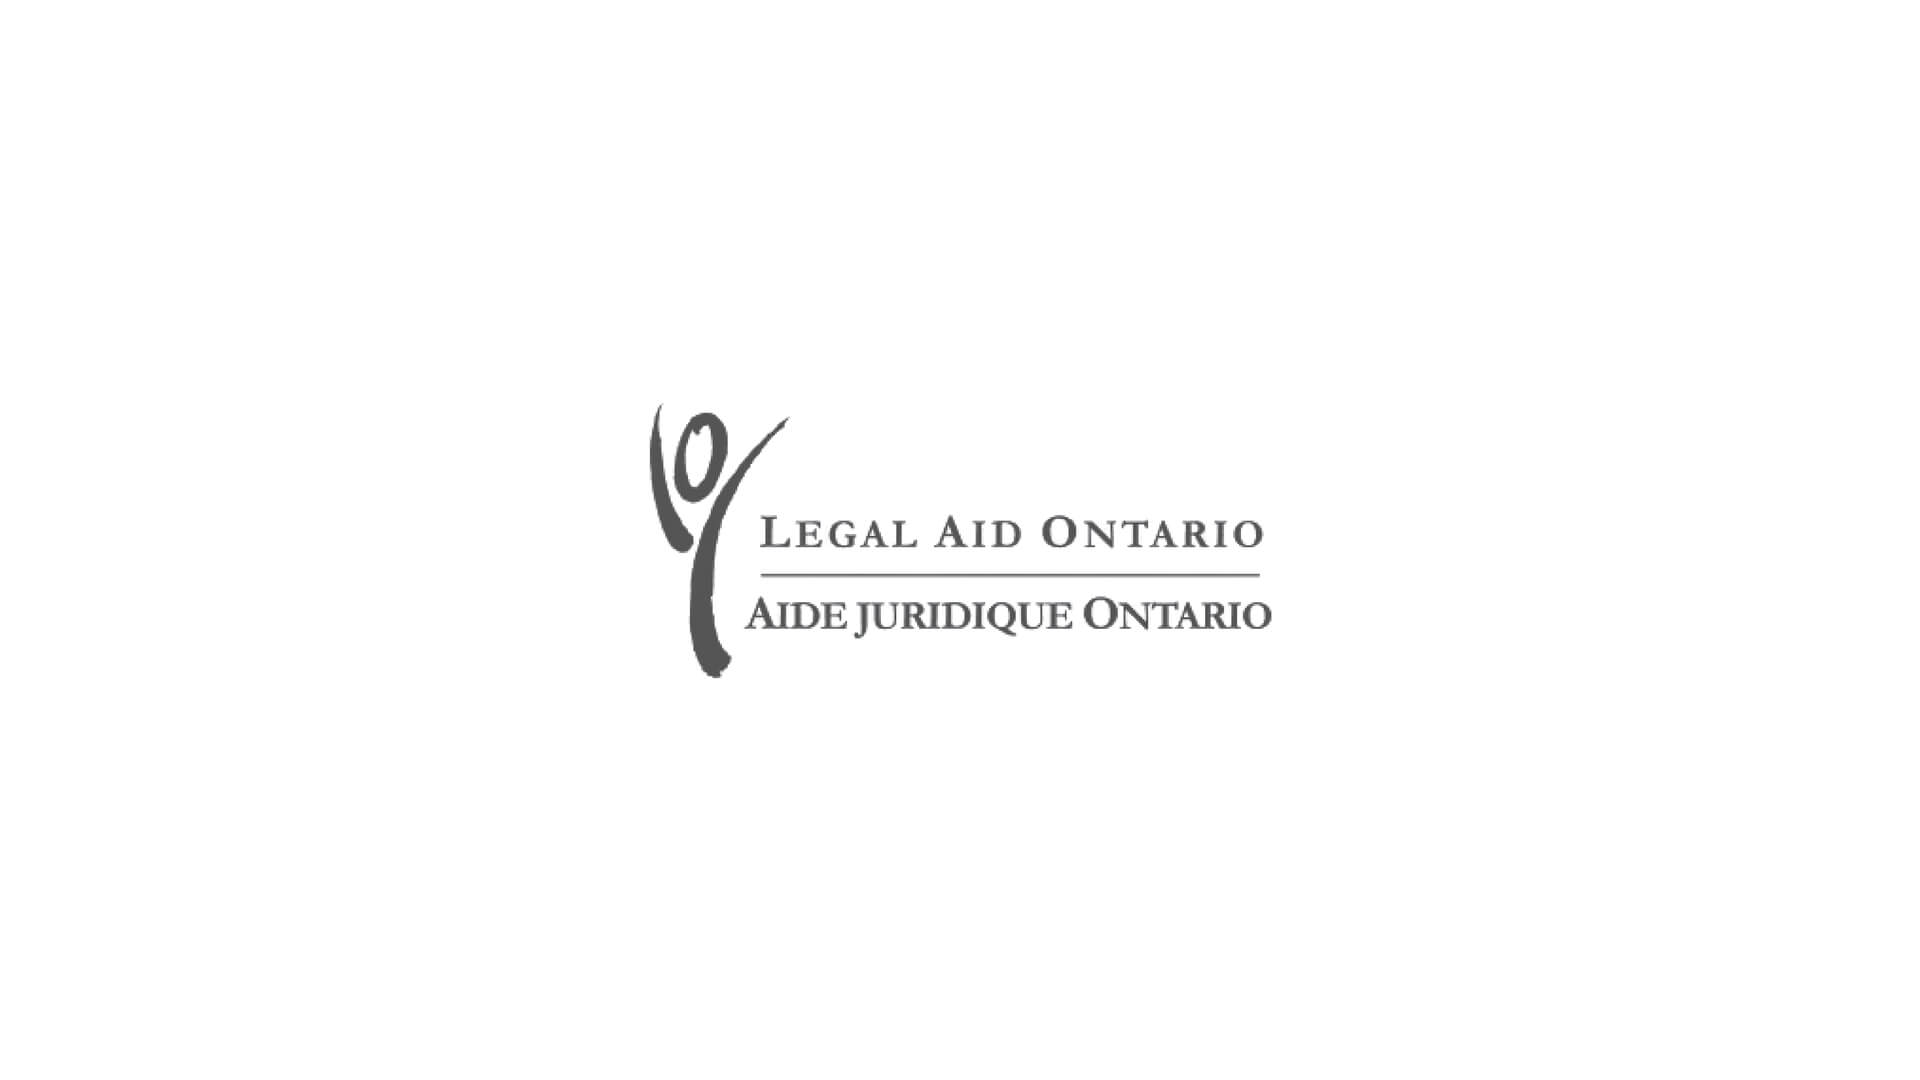 Timmins Care Logo of legal aid ontario featuring stylized scales of justice, with text "legal aid ontario" in english and "aide juridique ontario" in french. Cochrane District Social Services Administration Board